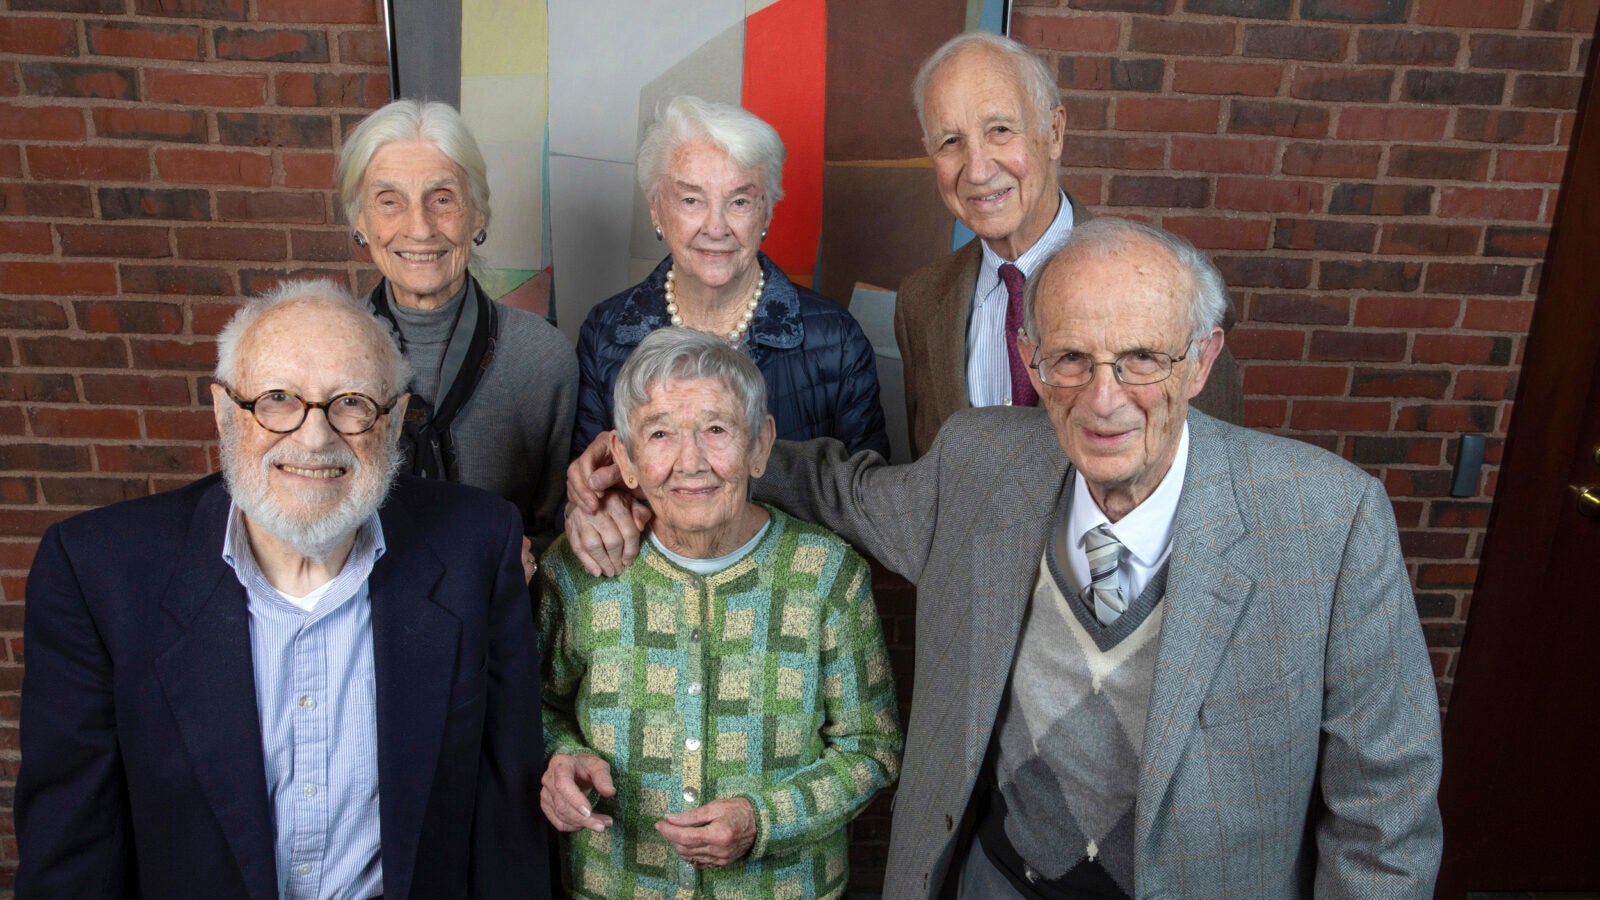 Six members of the Class of 1948 pose for a group photo. Front row (from left): Steven Stadler, Natalie Basso Ryan, Ray Goldberg. Back row: Sayre Phillips Sheldon, Eleanor “Buster” Foley Glimp, and Henry Lee. 